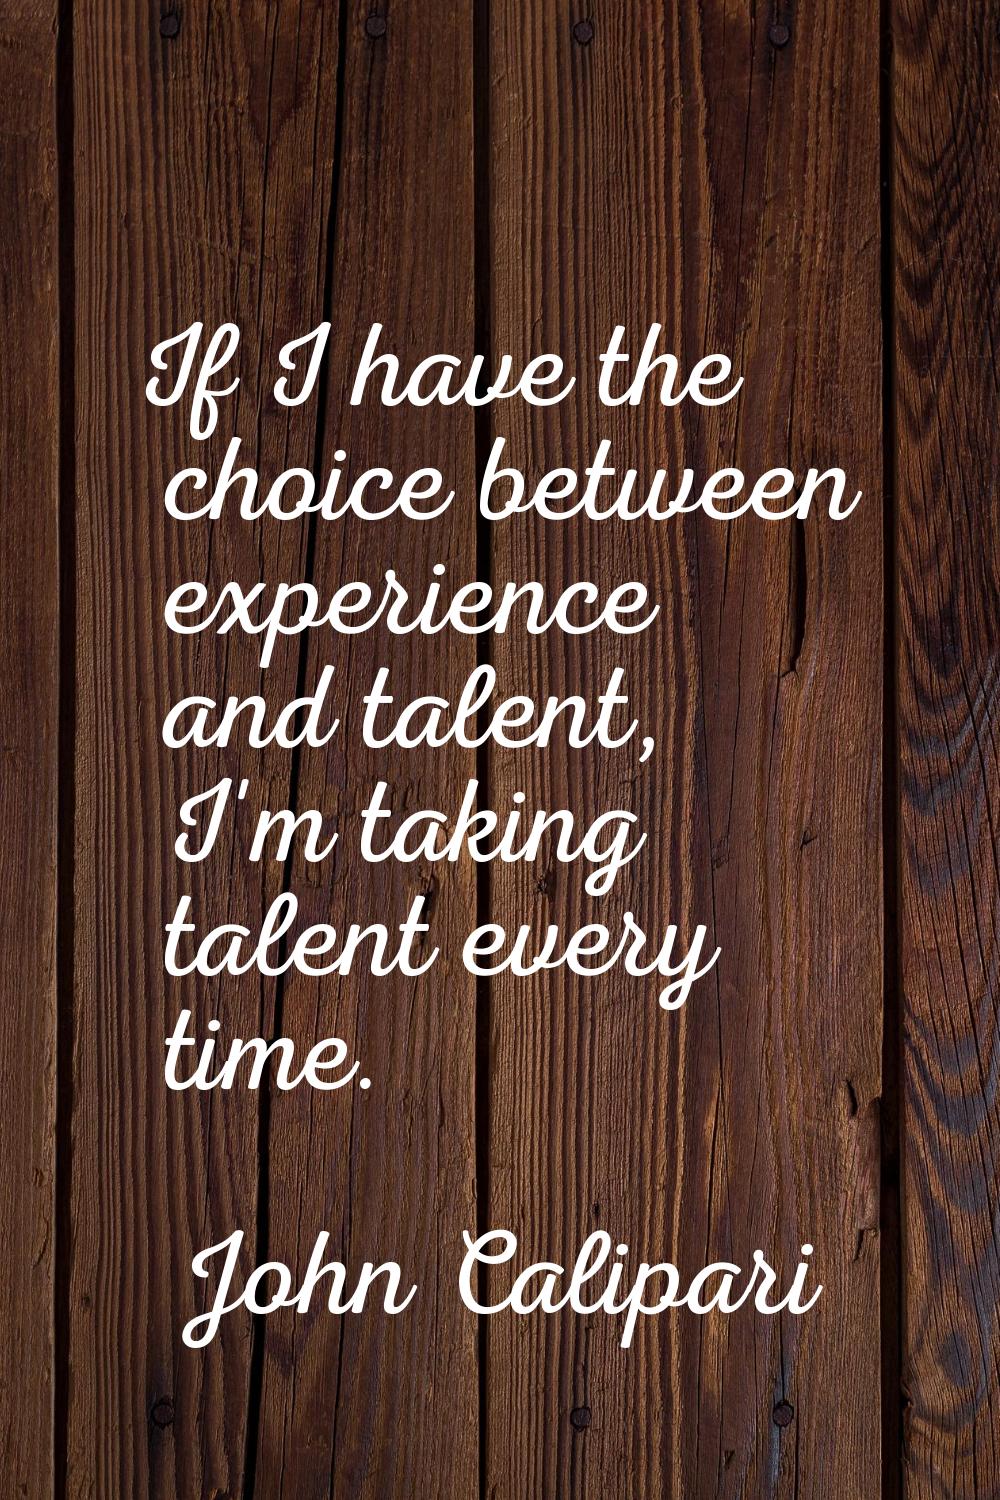 If I have the choice between experience and talent, I'm taking talent every time.